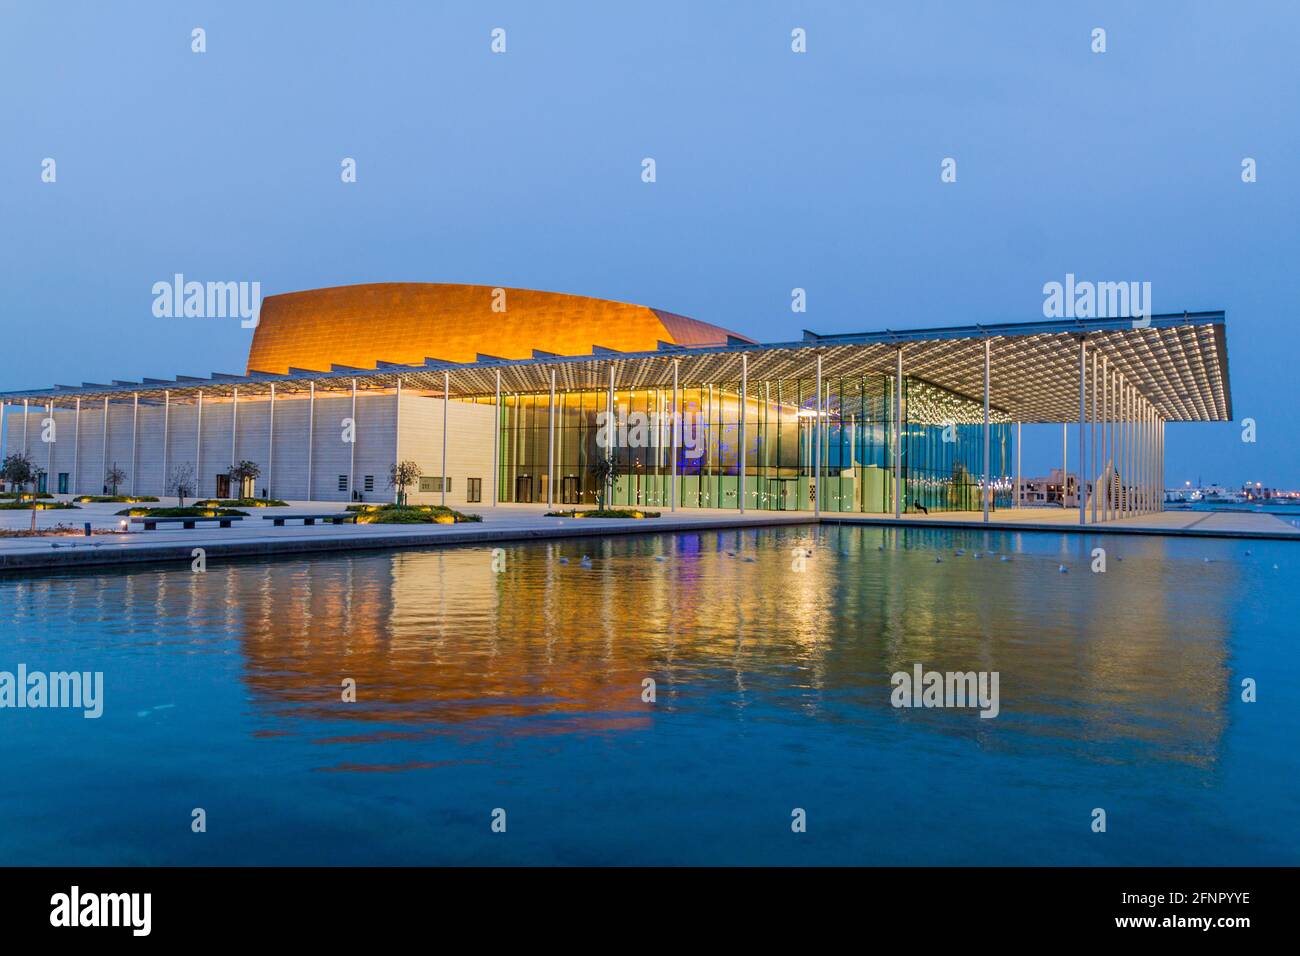 MANAMA, BAHRAIN - MARCH 15, 2017: National Theatre of Bahrain reflecting in a pond. Stock Photo